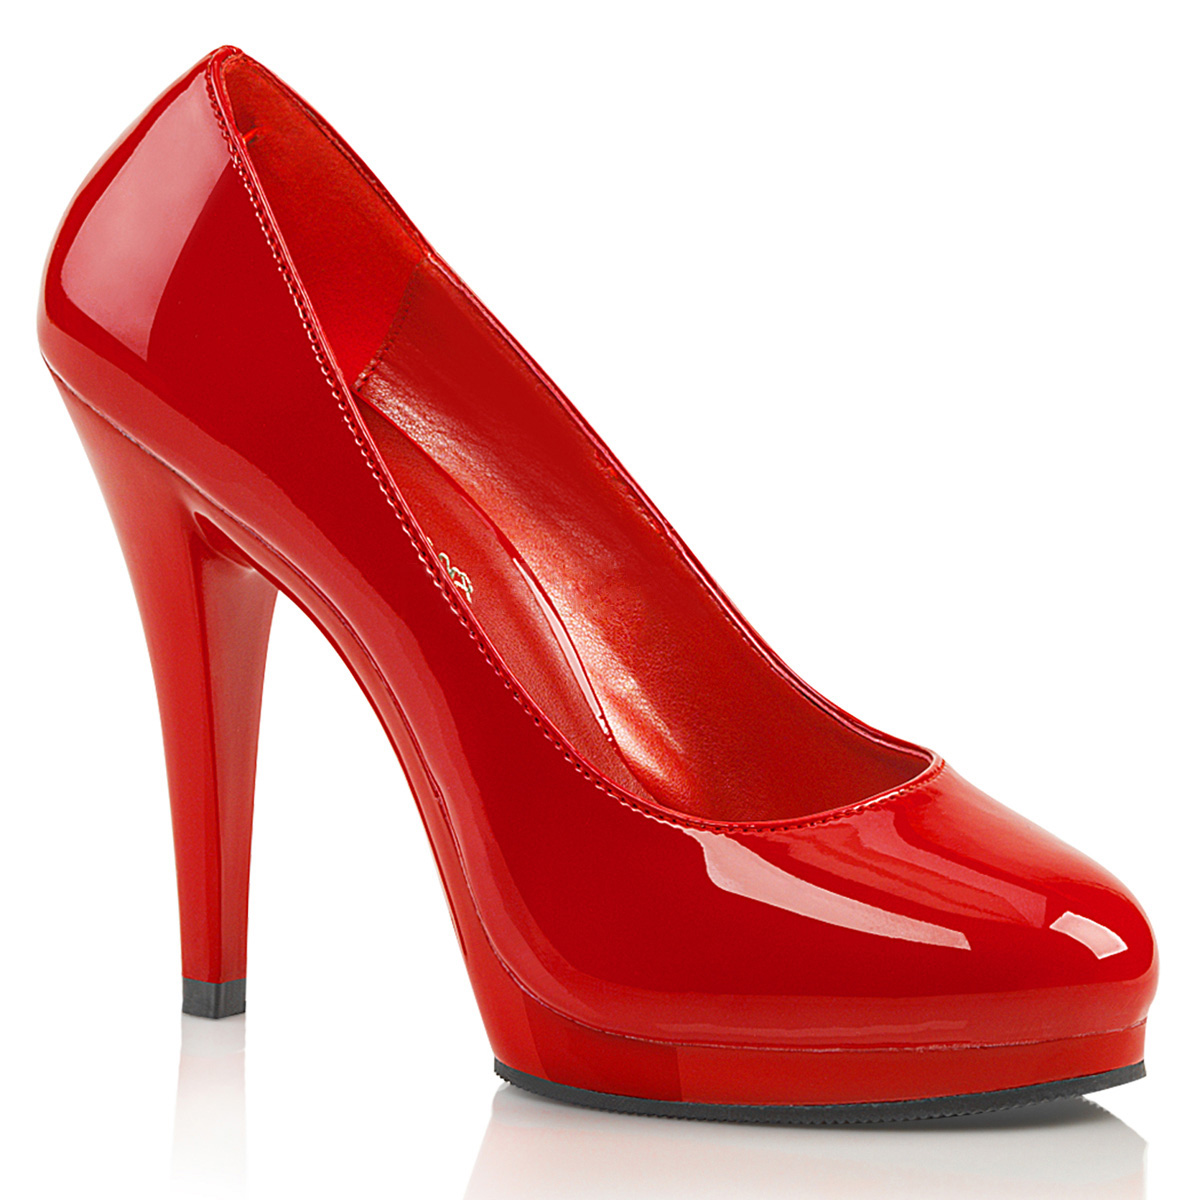 Pumps FLAIR-480 - Patent Red, Fabulicious